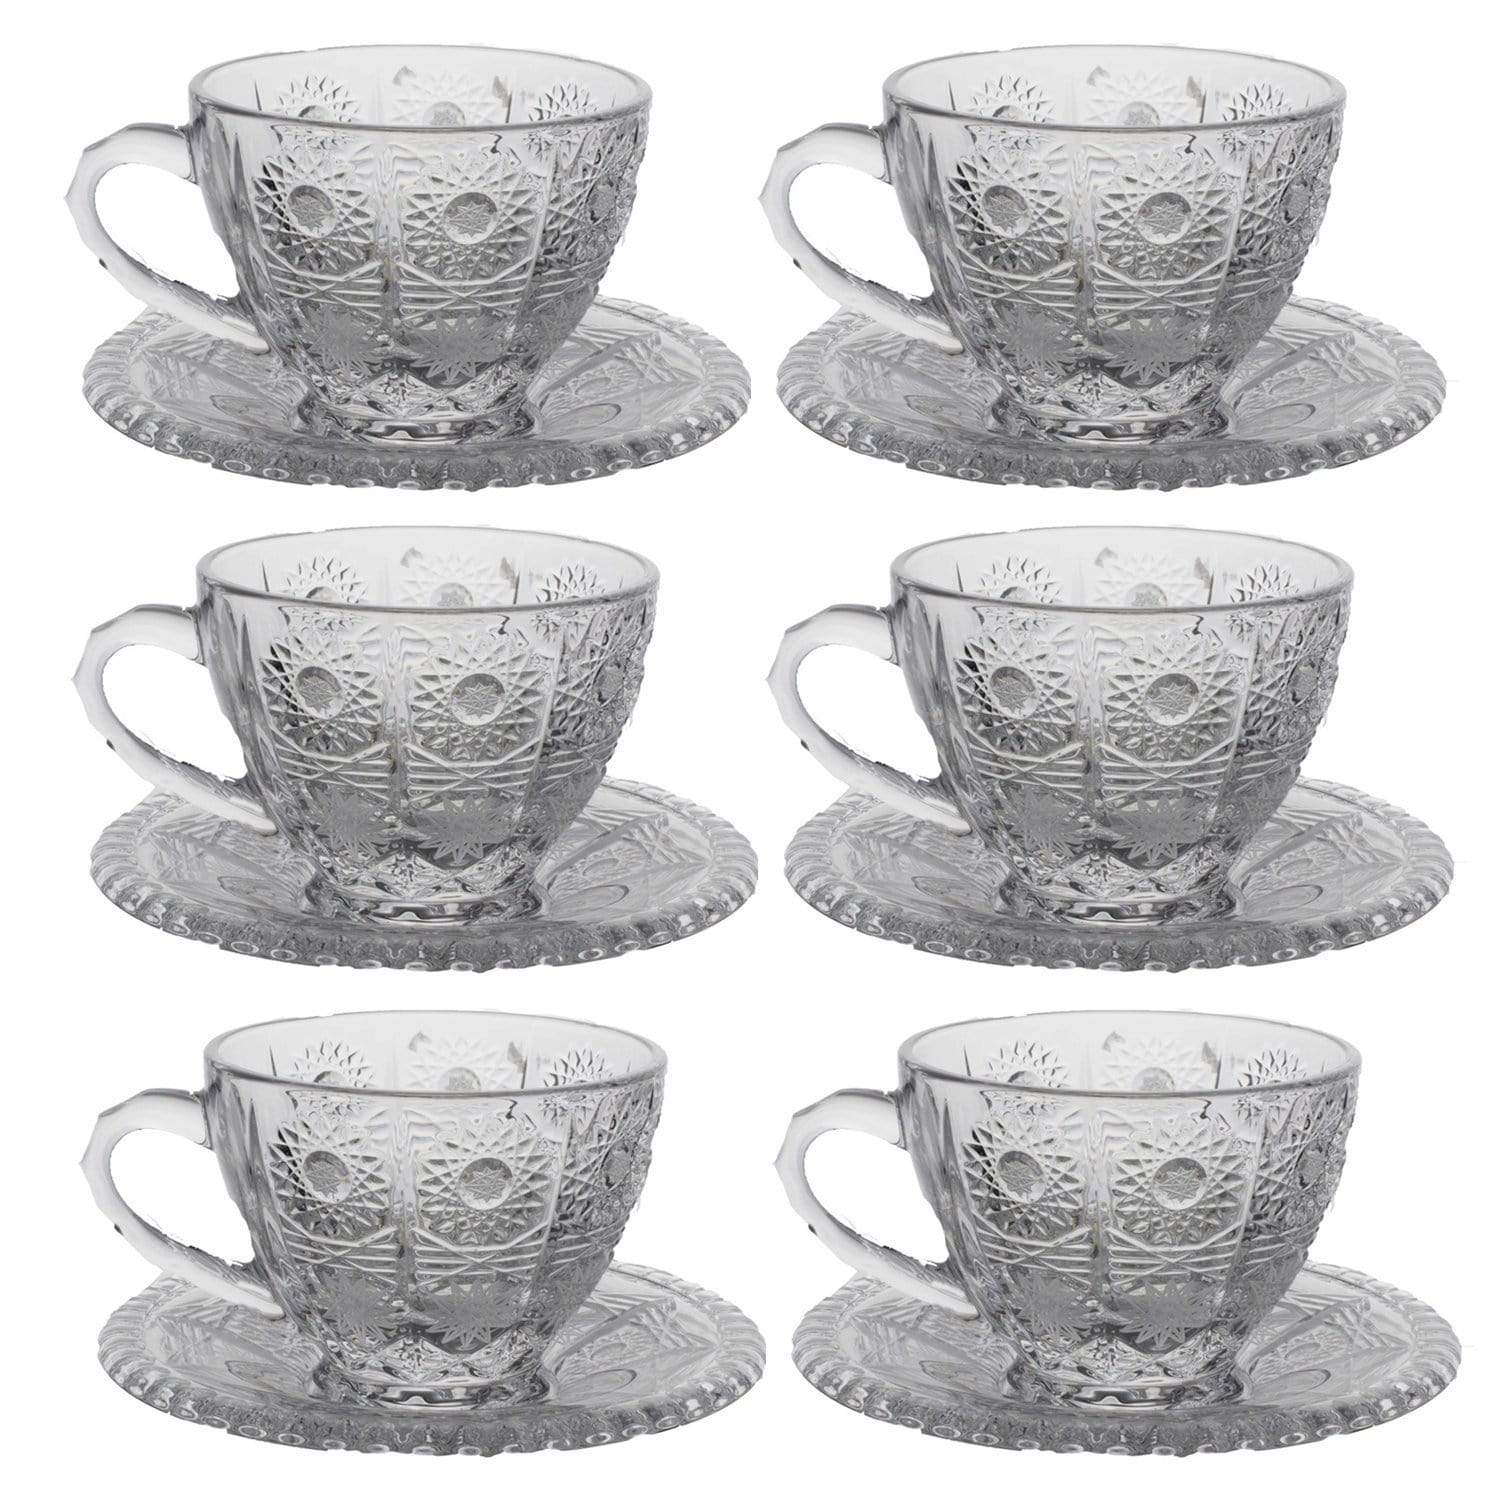 Bohemia Crystal Glass Sherine Cup and Saucer Set - Clear, 57001_625 - 5392149 - Jashanmal Home